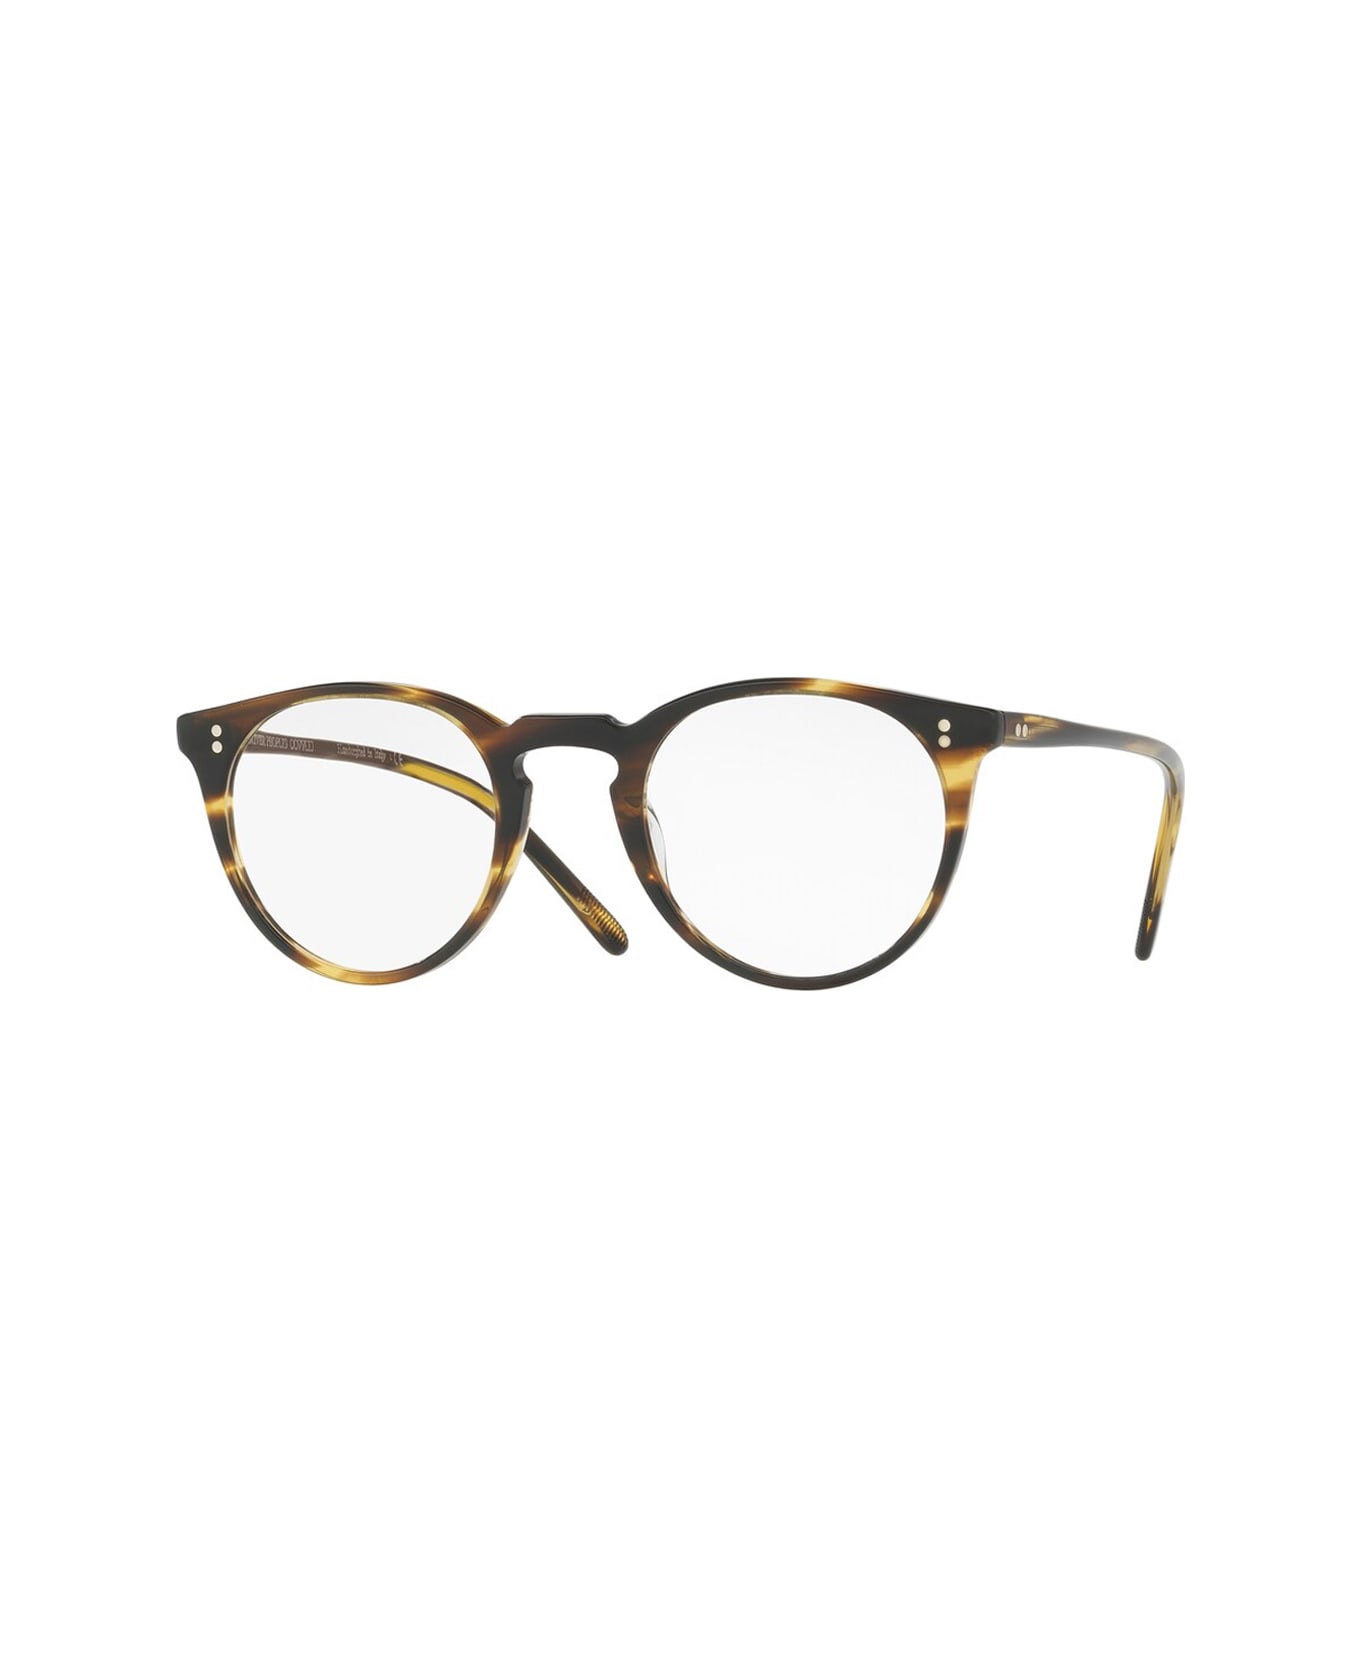 Oliver Peoples Ov5183 O'malley Glasses - Marrone